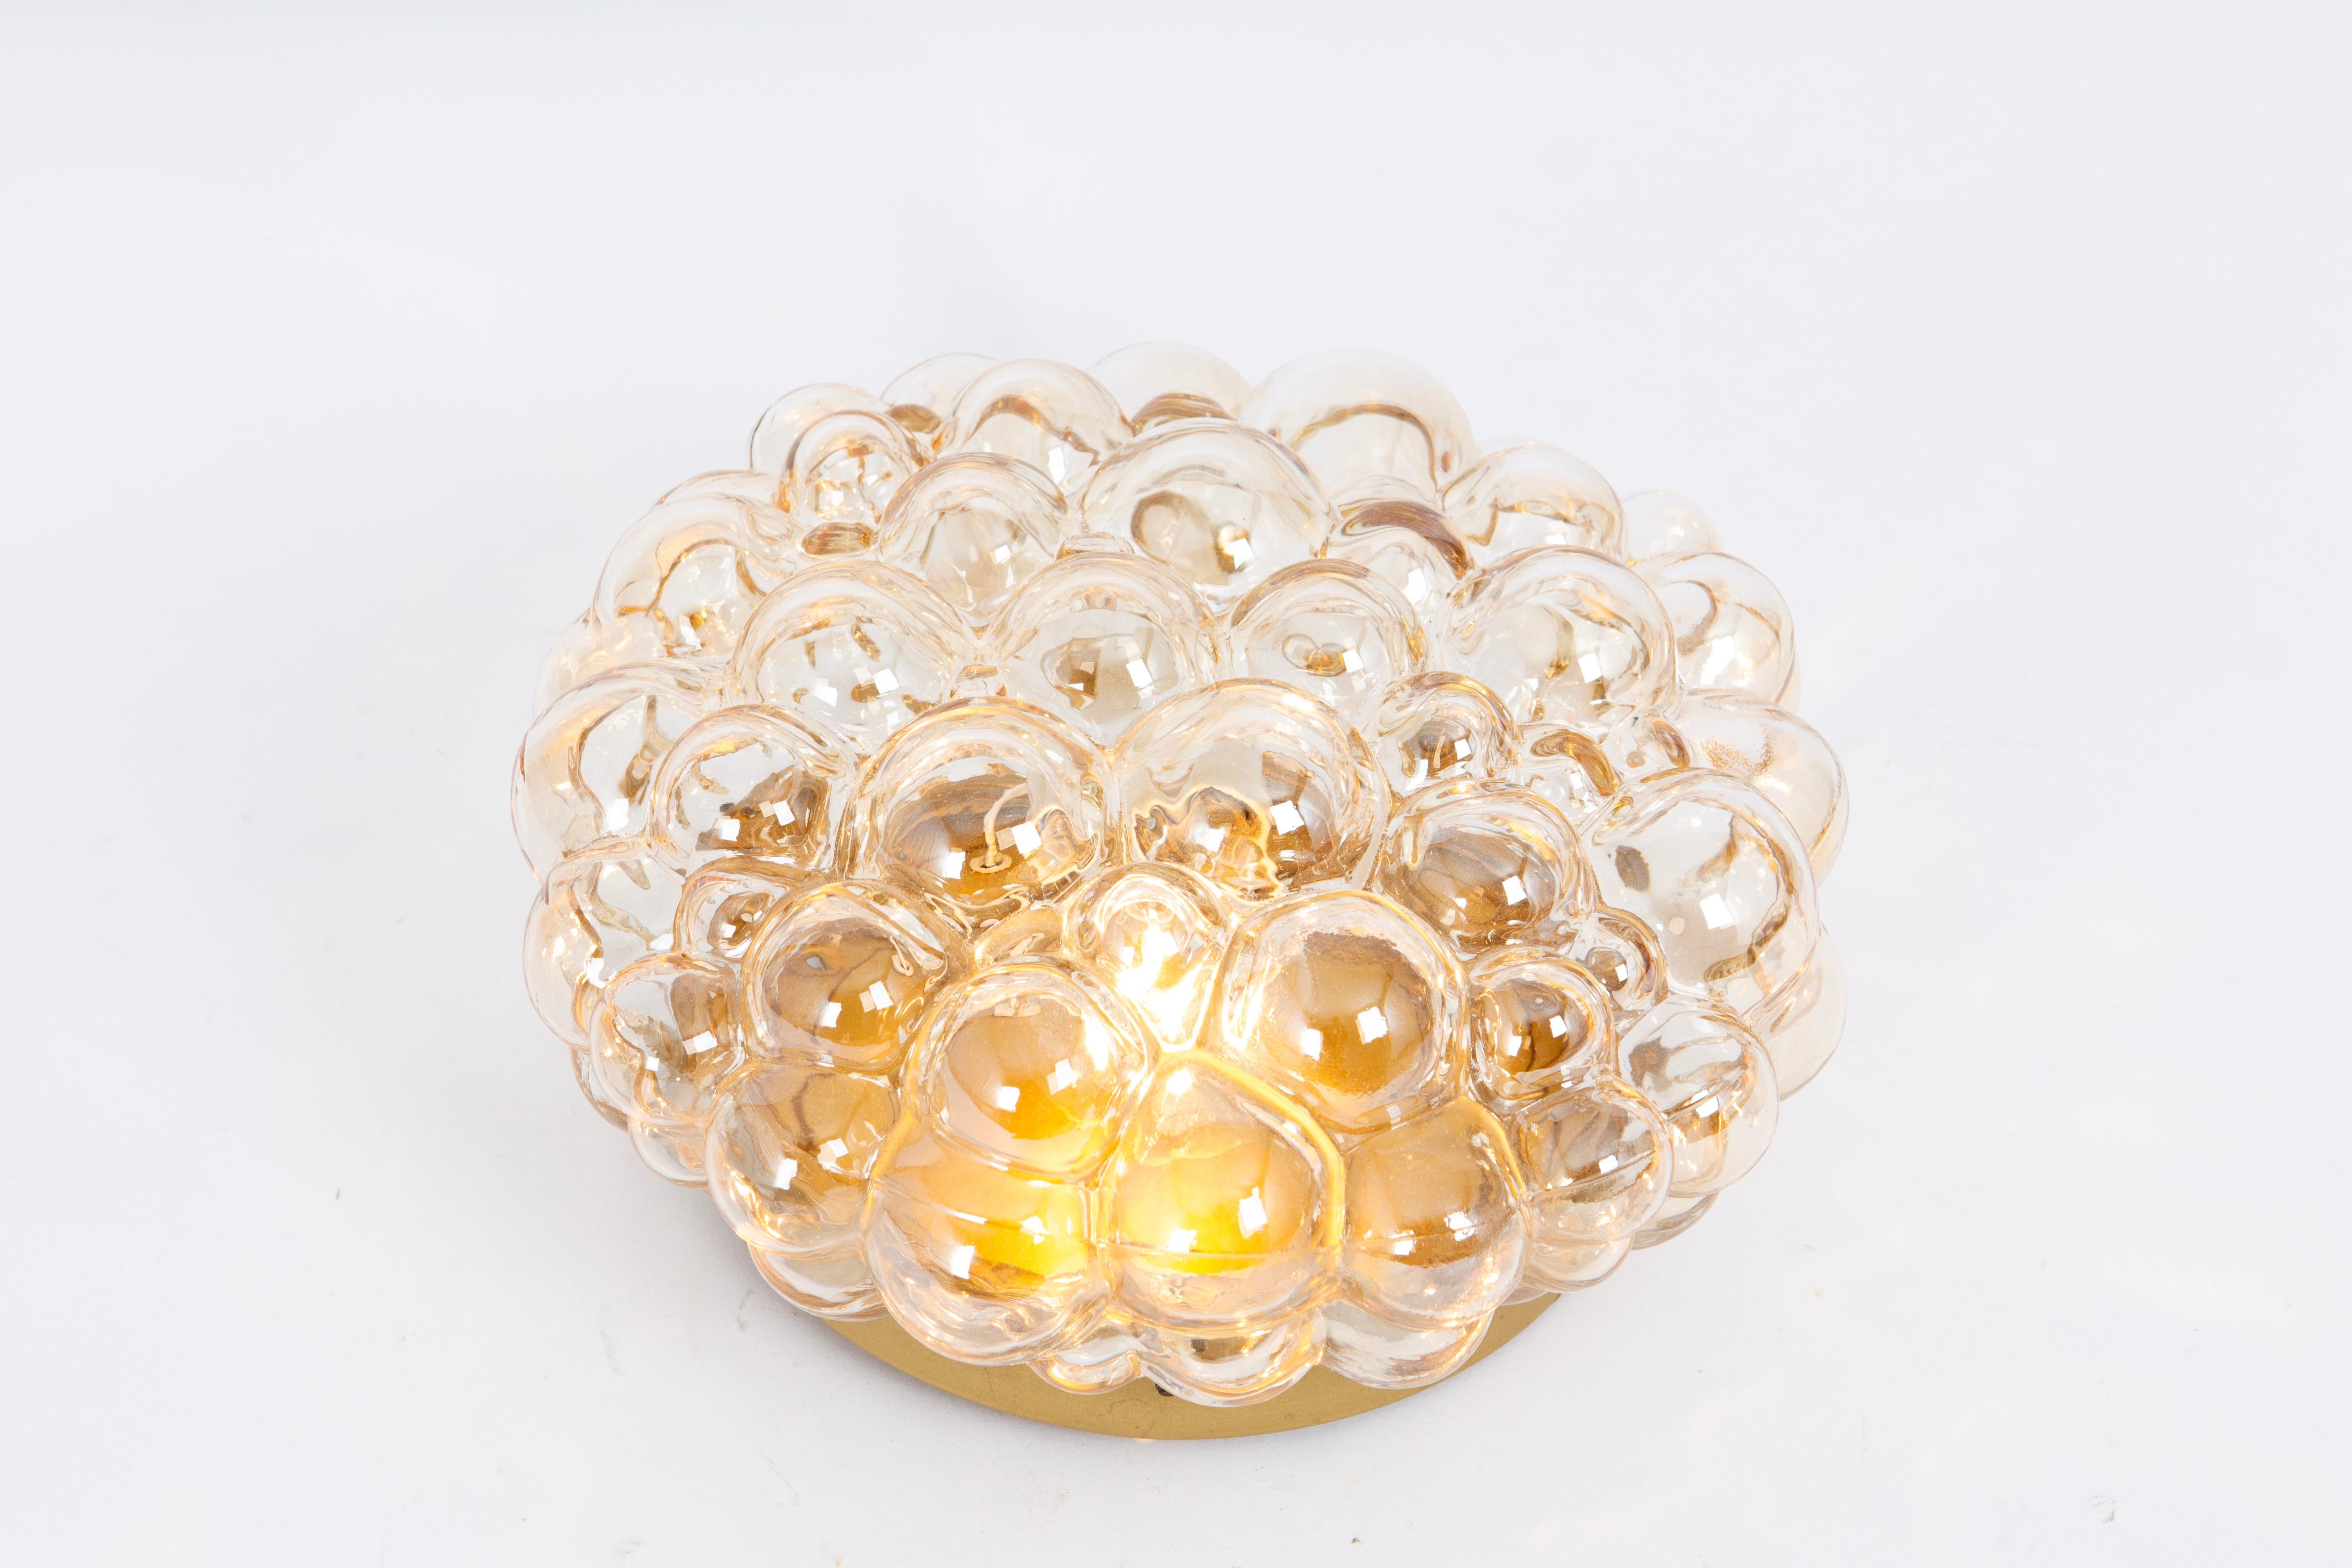 Large Amber bubble glass sconce in style by Helena Tynell, Germany.
High quality and in very good condition. Cleaned, well-wired, and ready to use. 

Each Sconce / Flush mount requires 1 x E27 Standard bulbs with 60W max each 
Light bulbs are not